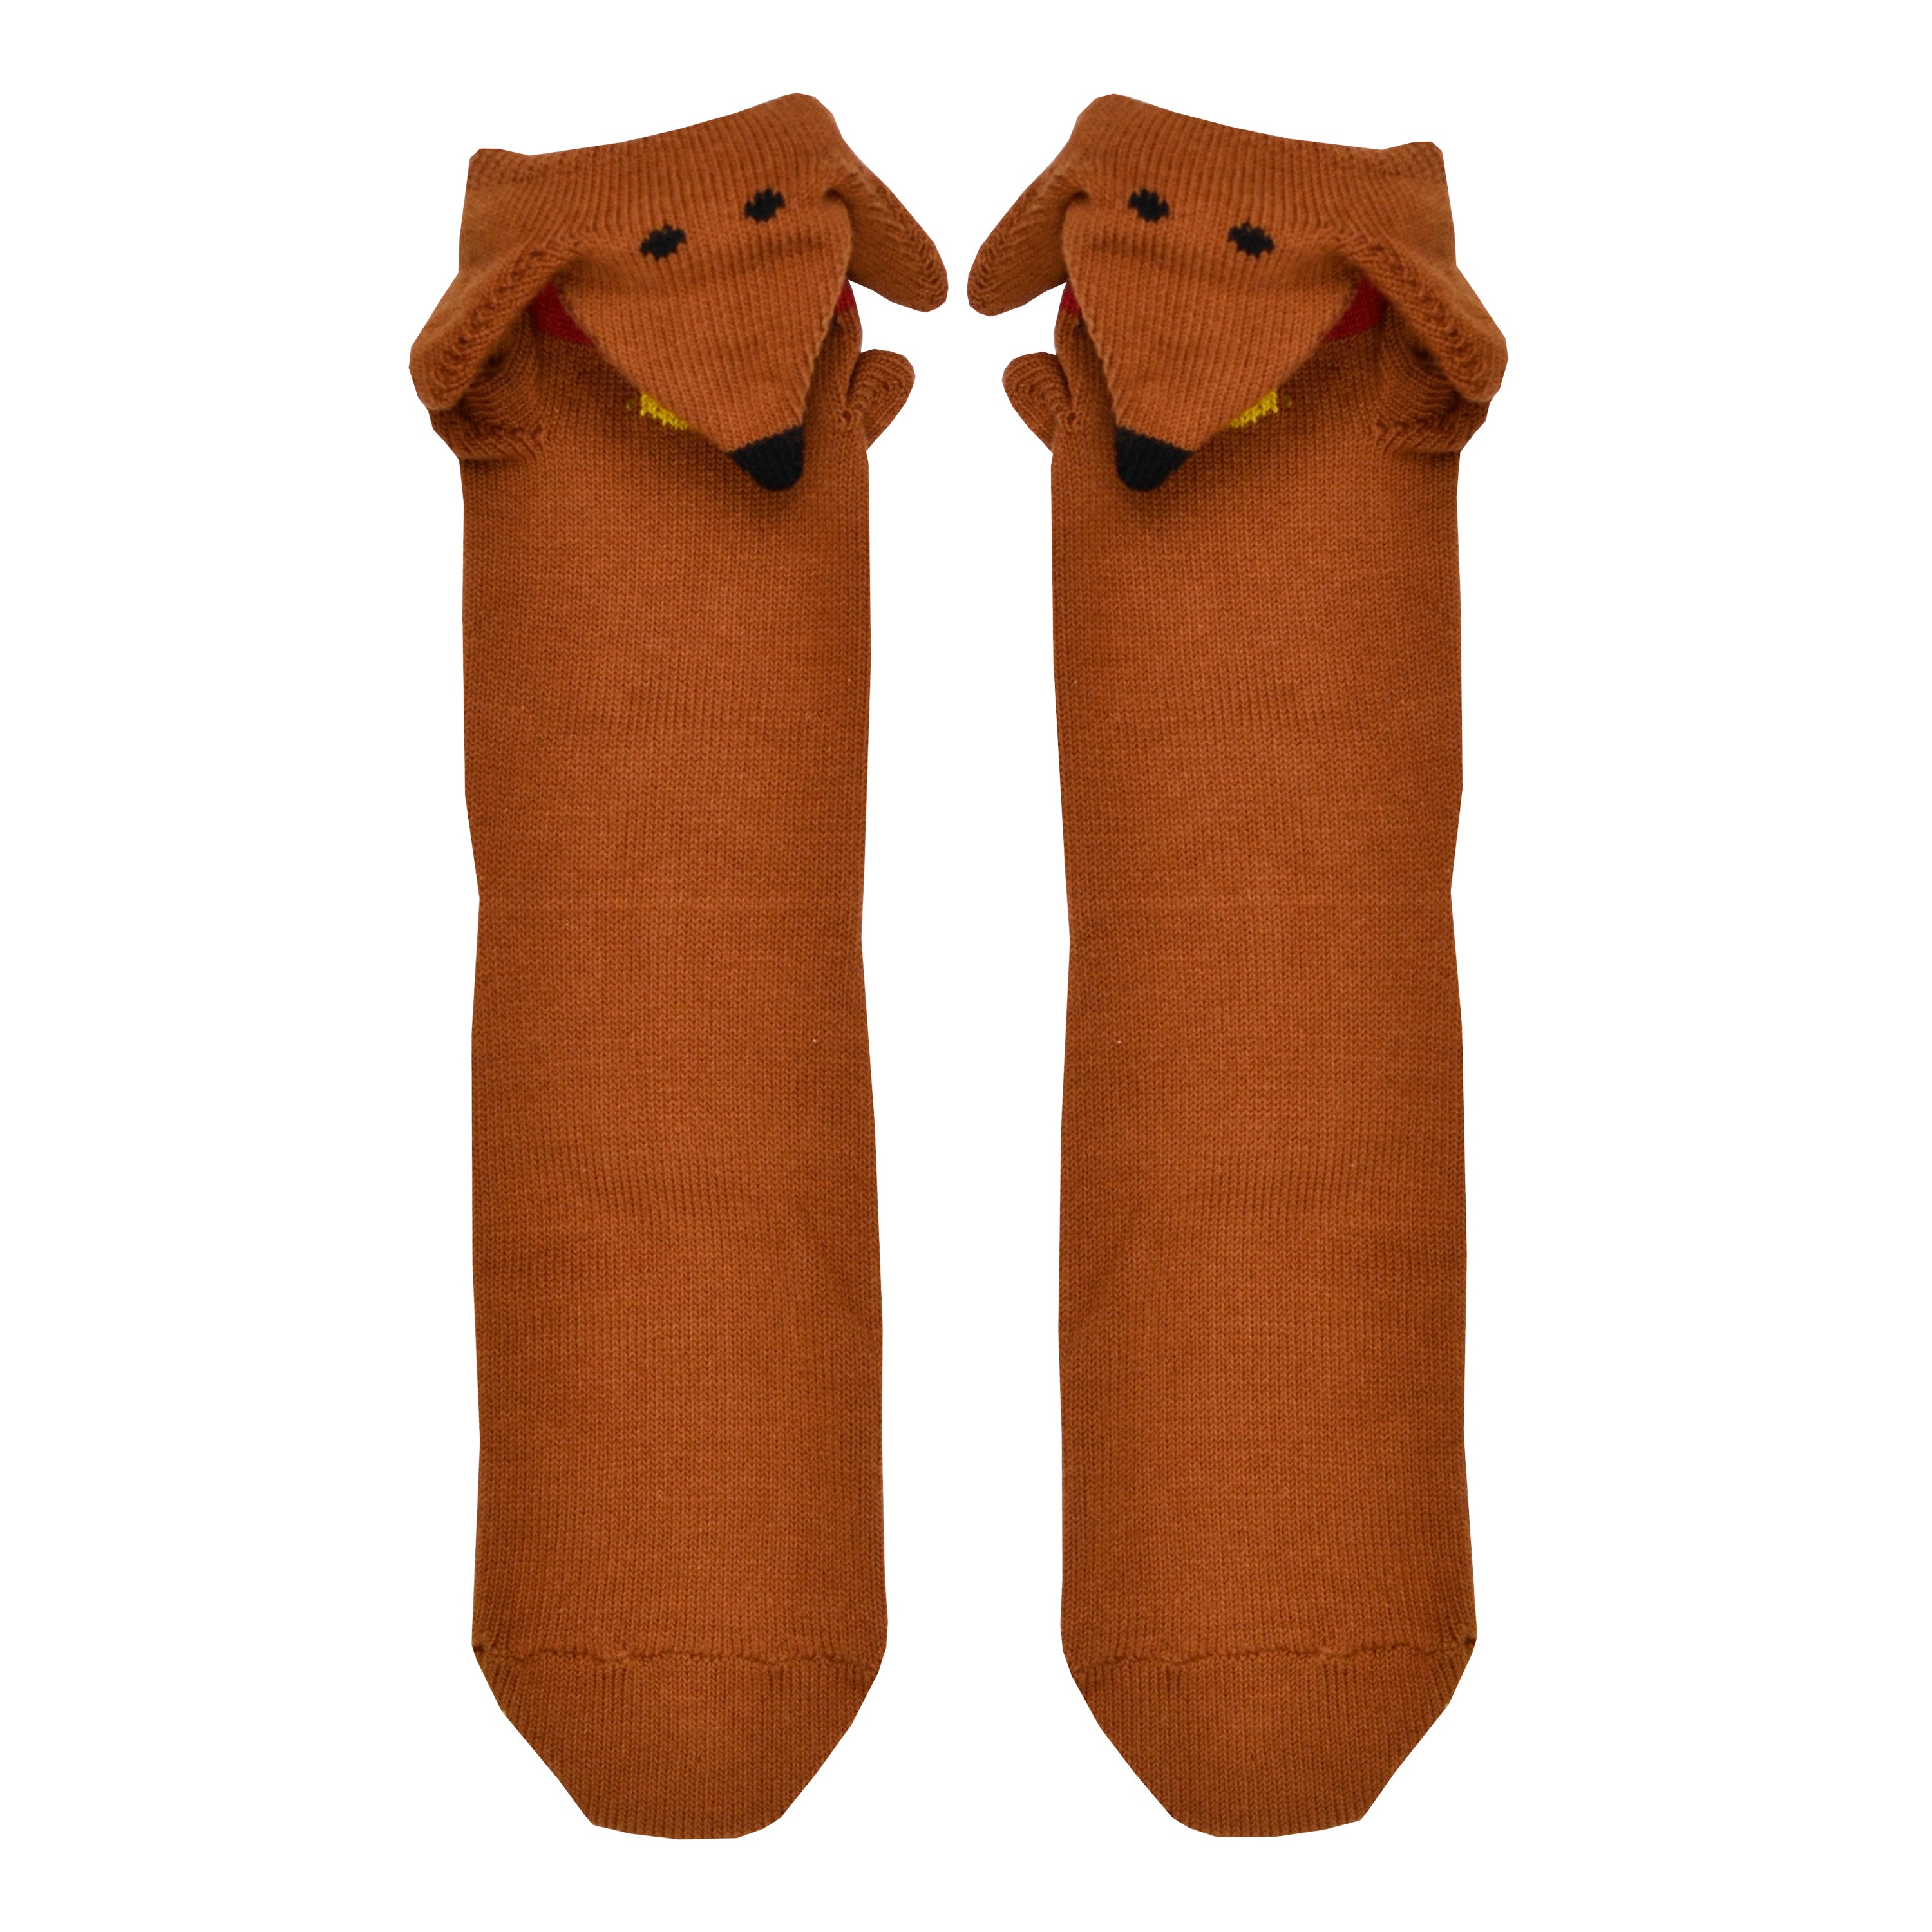 Shown in a flatlay, a pair of Foot Traffic, brown cotton women's crew socks with three dimensional pattern of cute brown dachshund dog